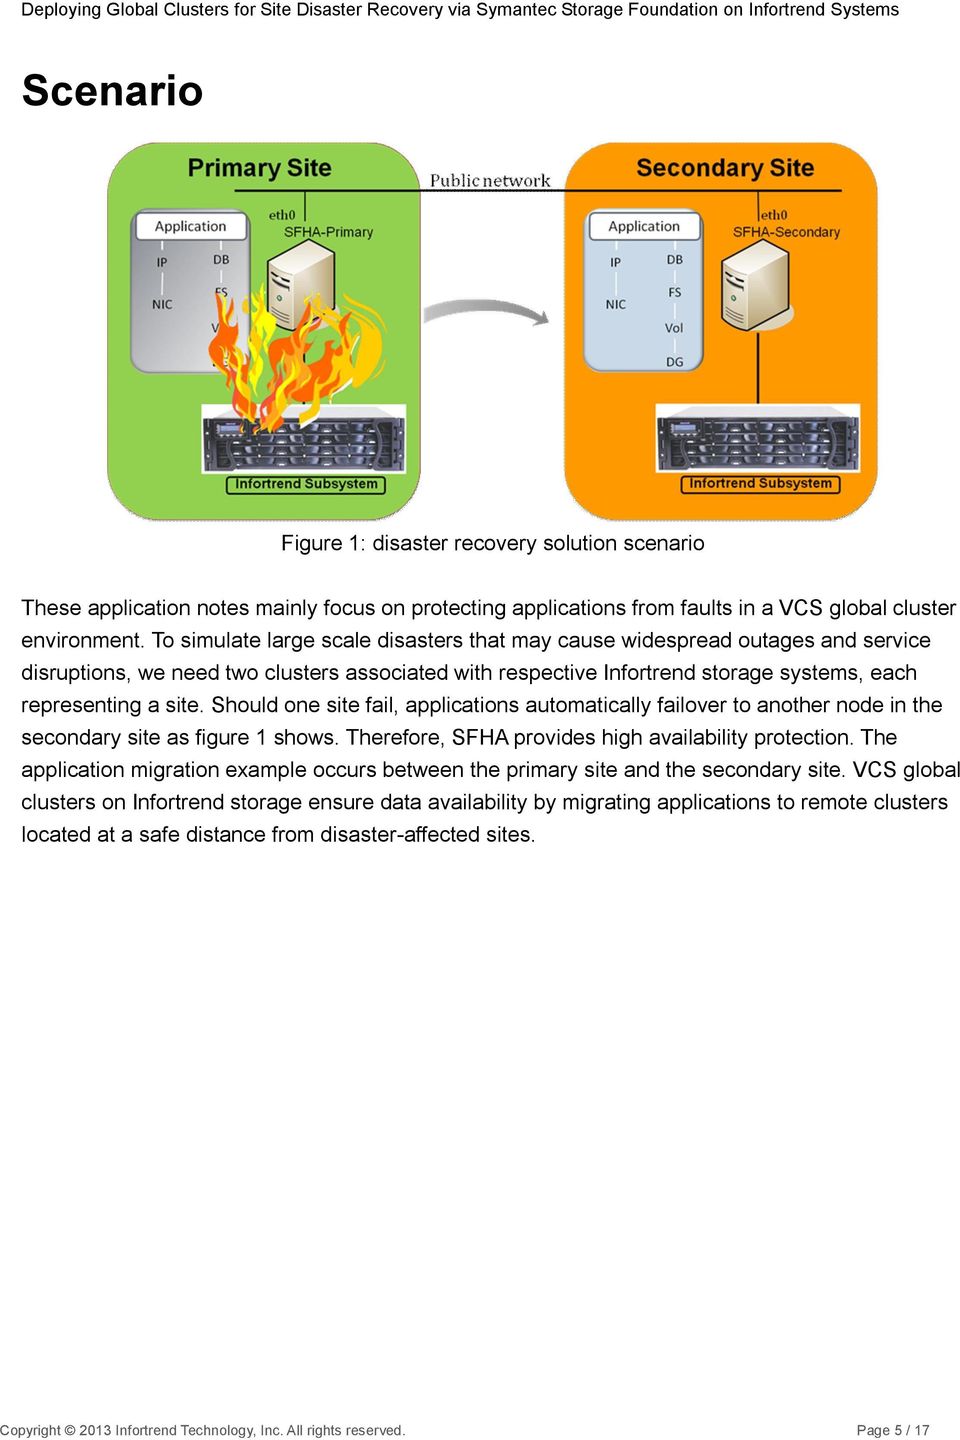 Should one site fail, applications automatically failover to another node in the secondary site as figure 1 shows. Therefore, SFHA provides high availability protection.